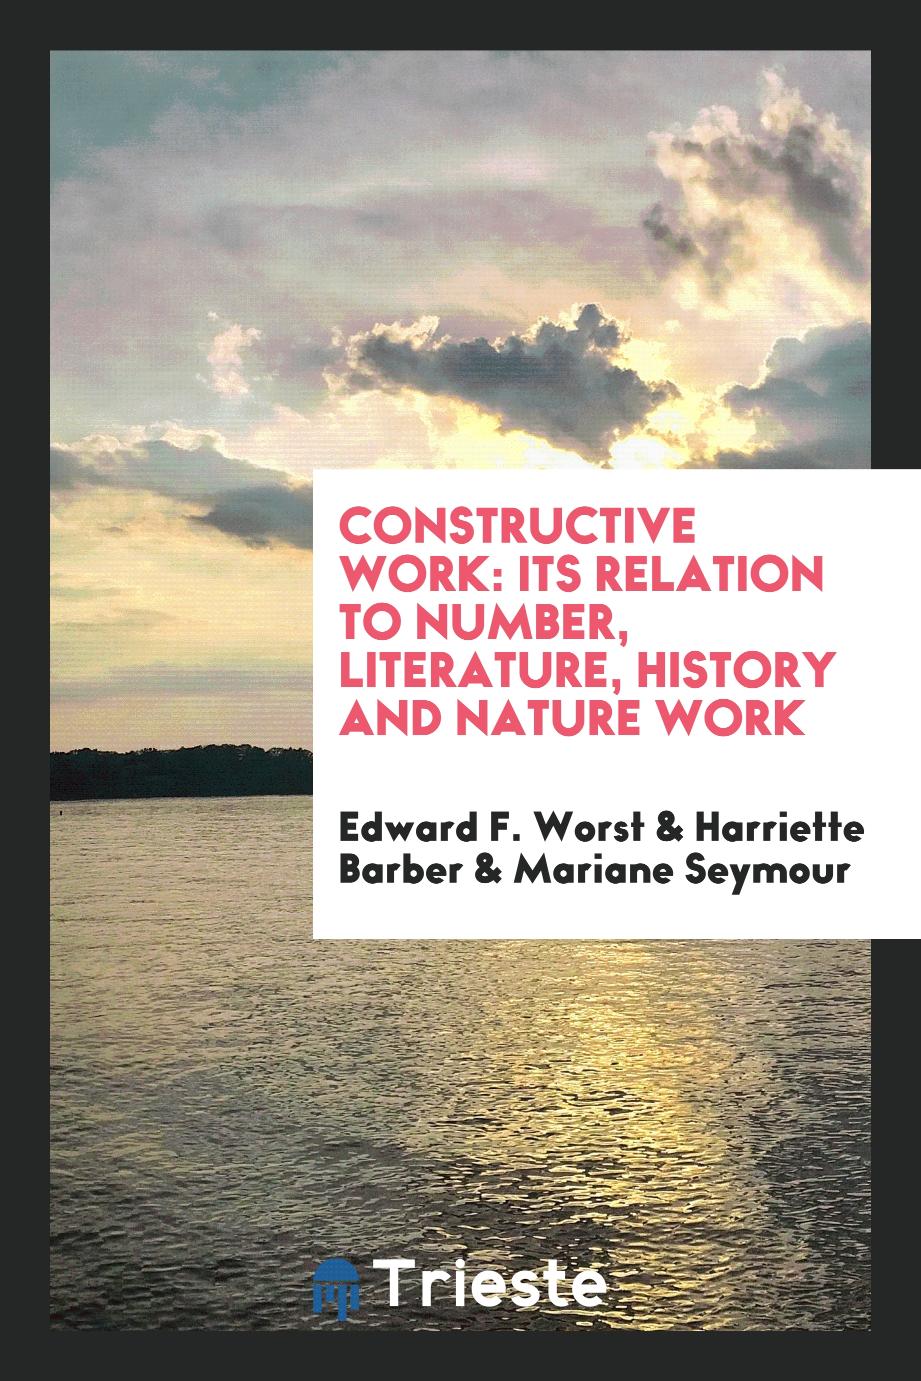 Constructive Work: Its Relation to Number, Literature, History and Nature Work